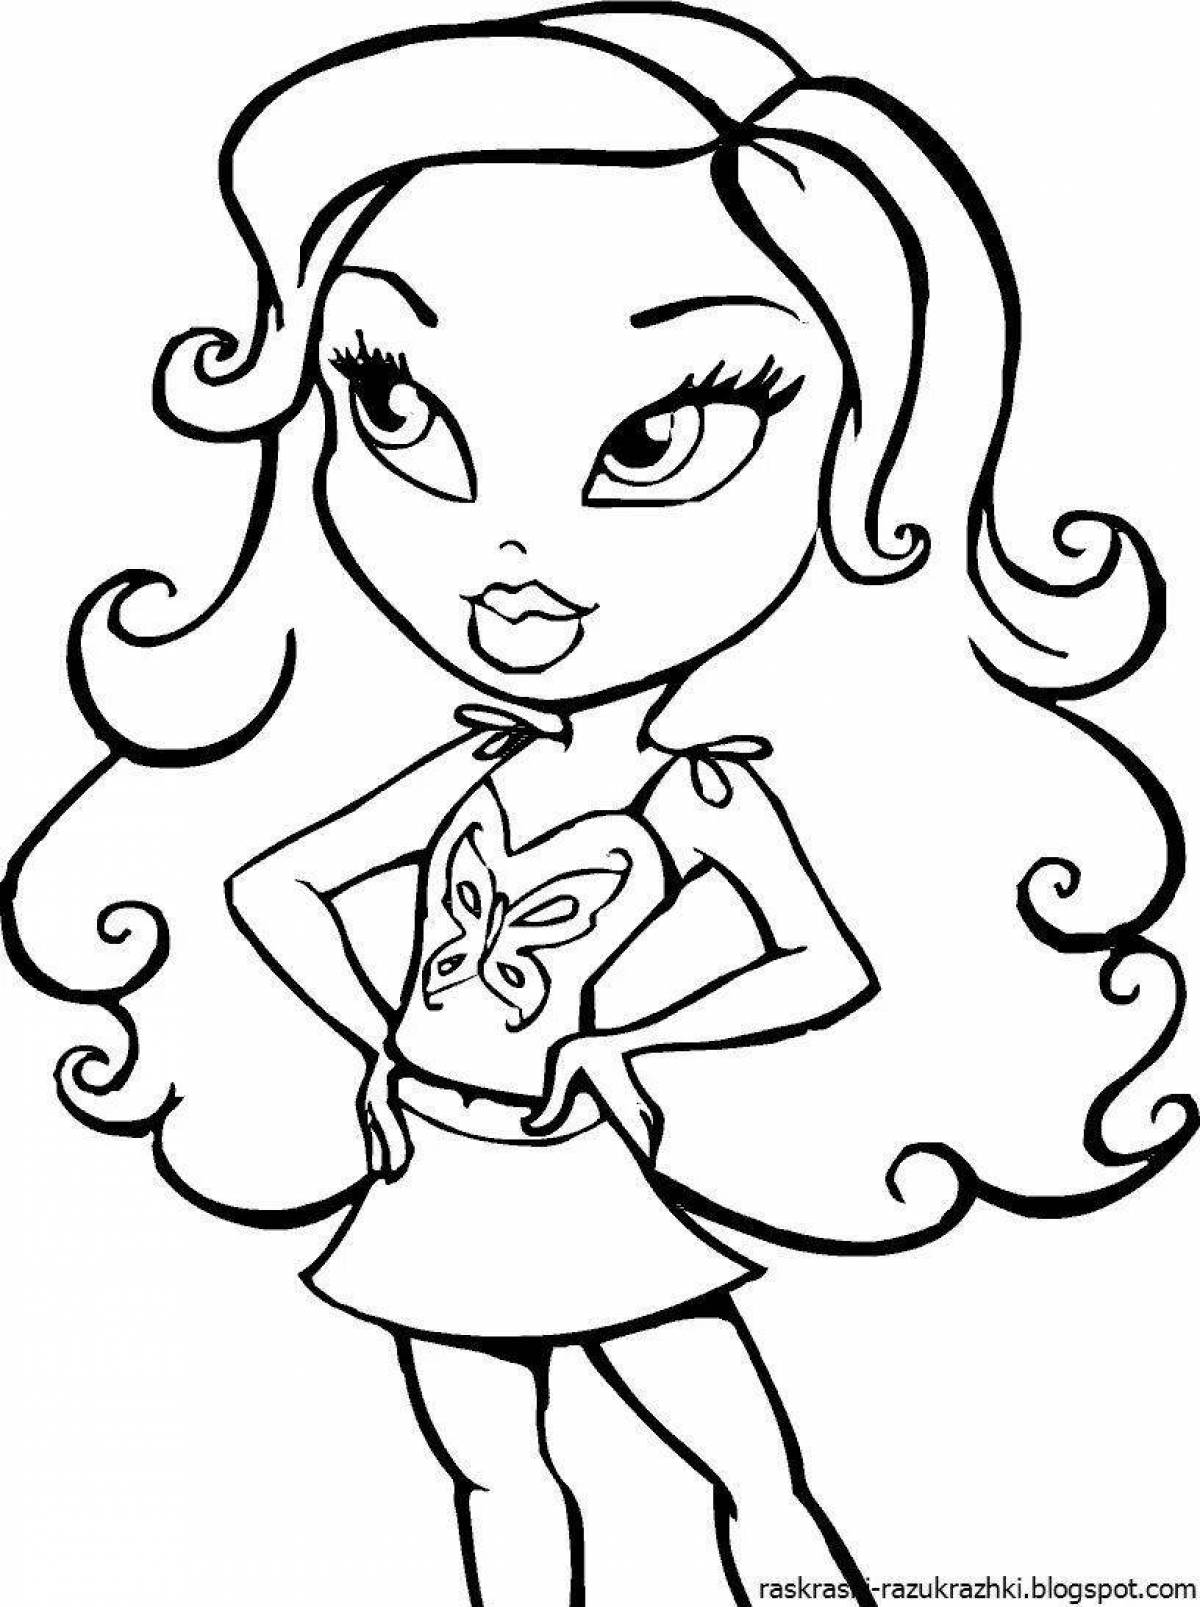 Glow Pencil Coloring Page for Girls